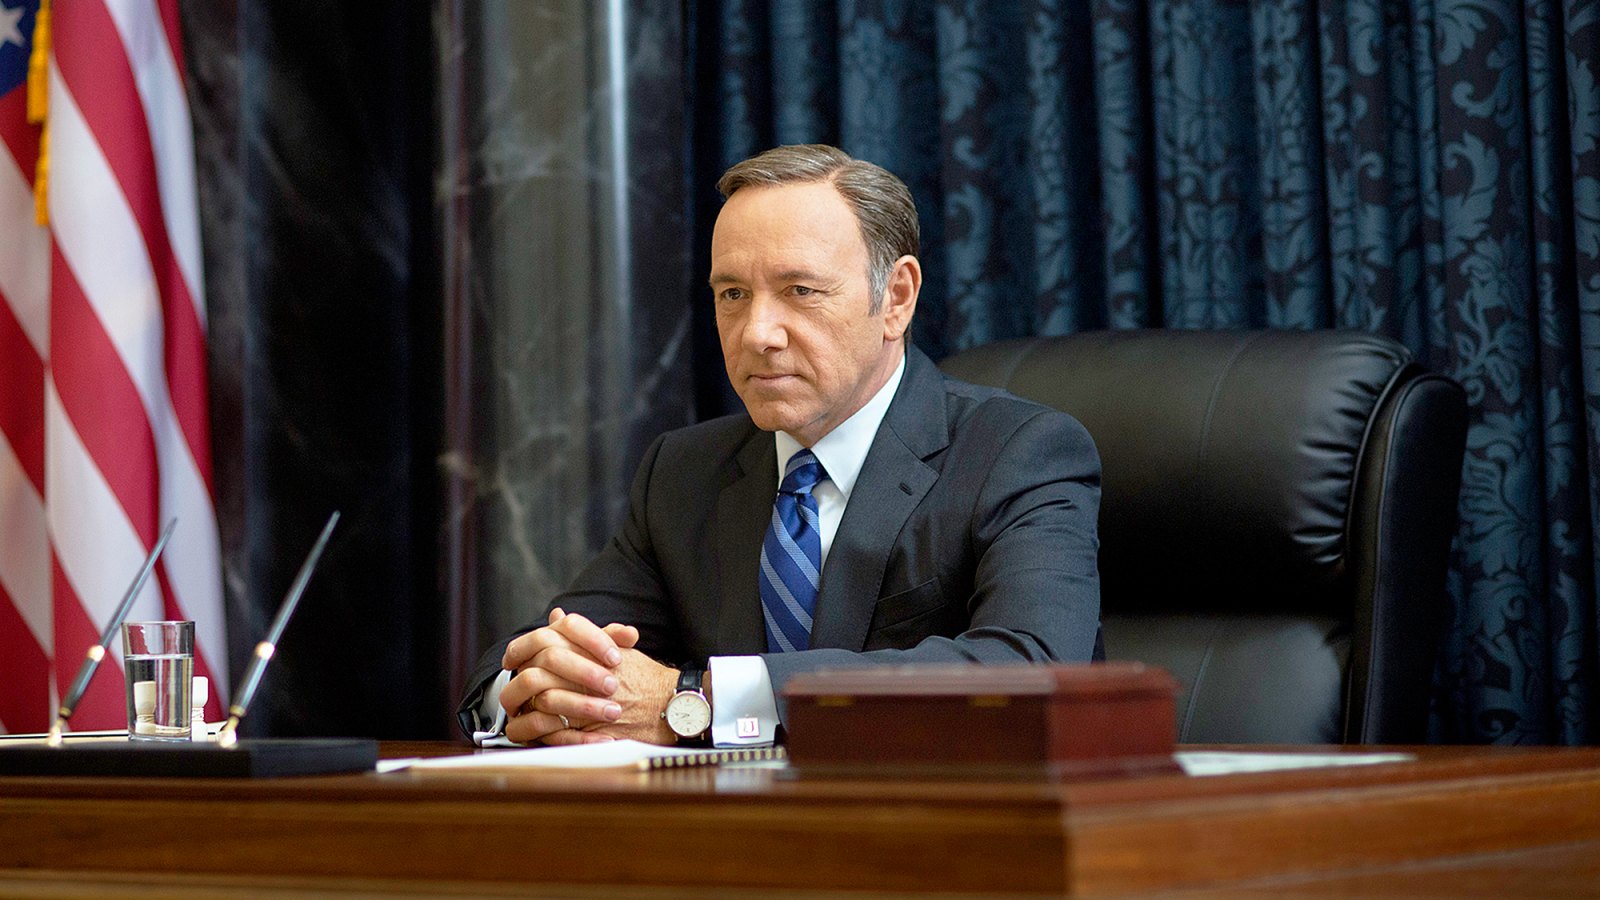 Kevin Spacey House of Cards